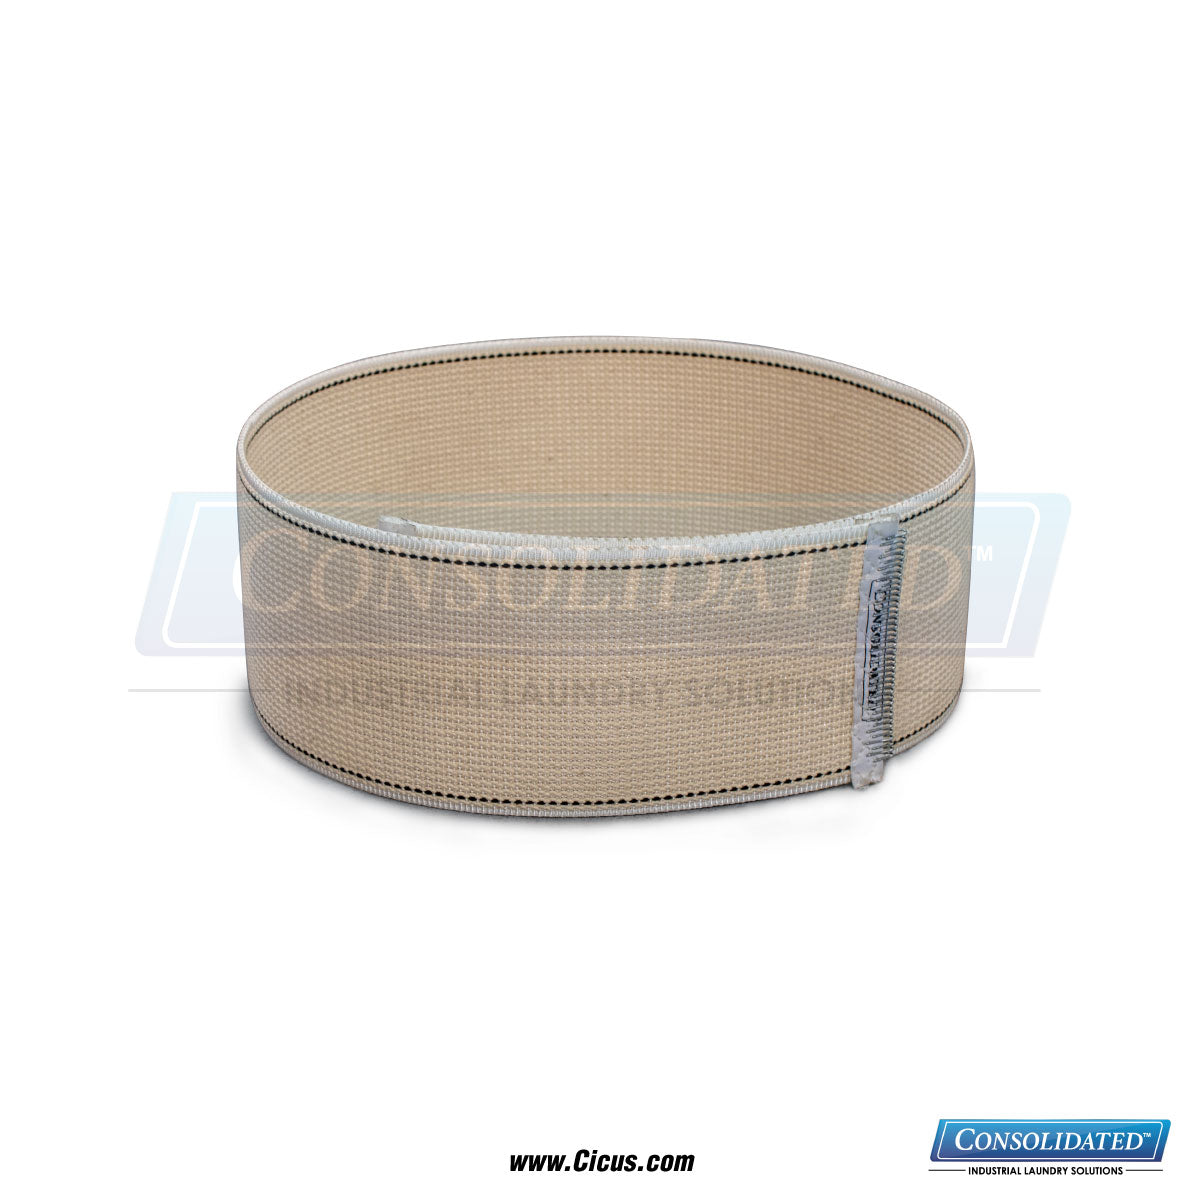 CIC Exclusive Chicago Dryer Canvas Ribbon - 2" x 102" (1001-064)